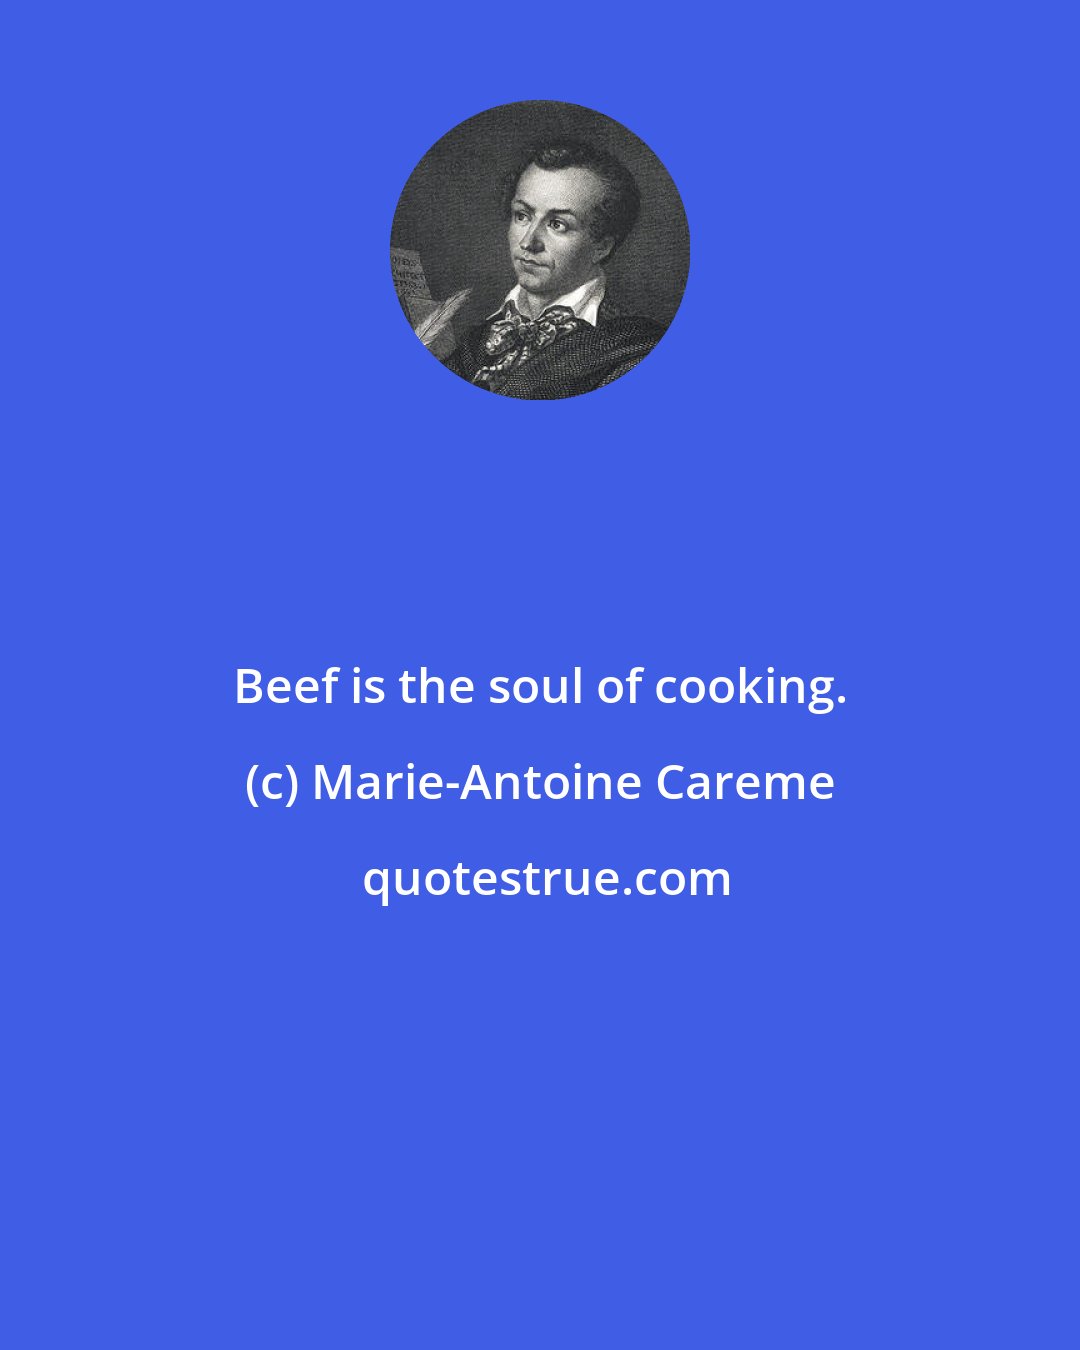 Marie-Antoine Careme: Beef is the soul of cooking.